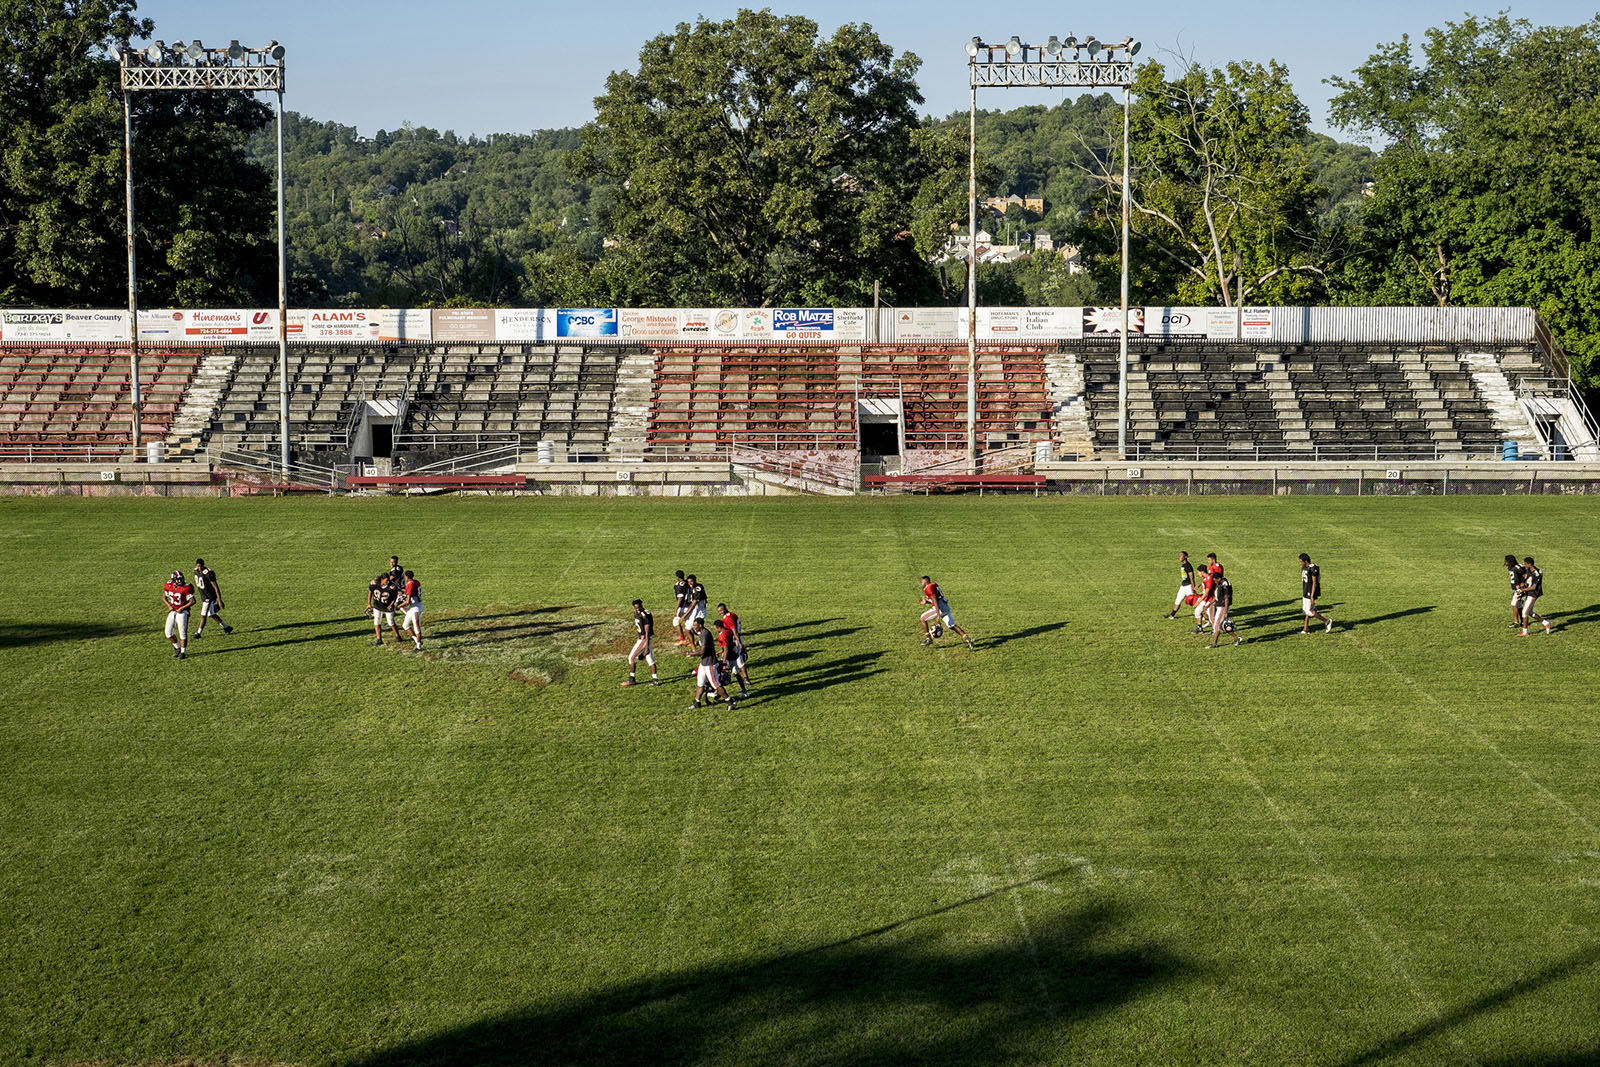 Football players on the Aliquippa field.